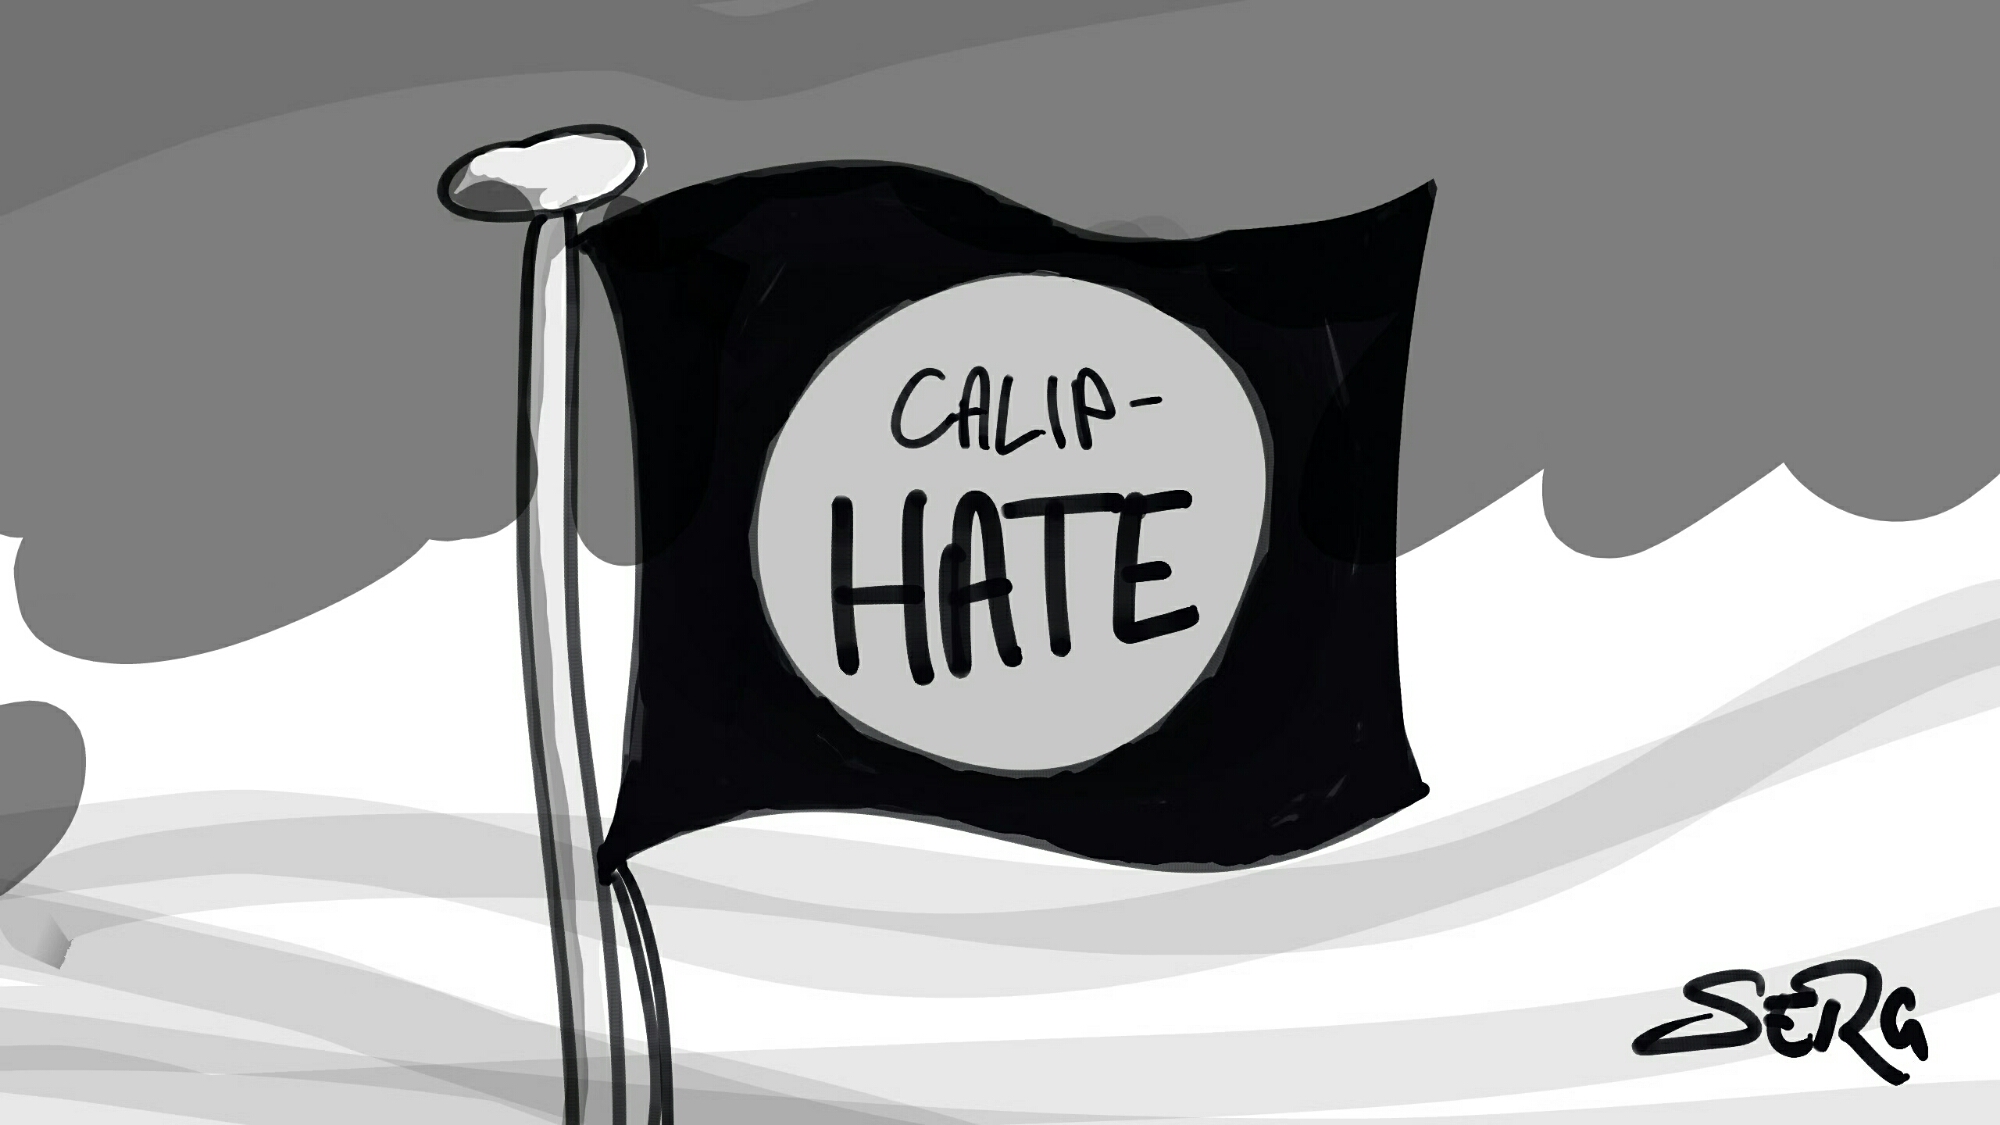 Flag of the ISIS caliphate, only broken so as to read "Calip-hate".